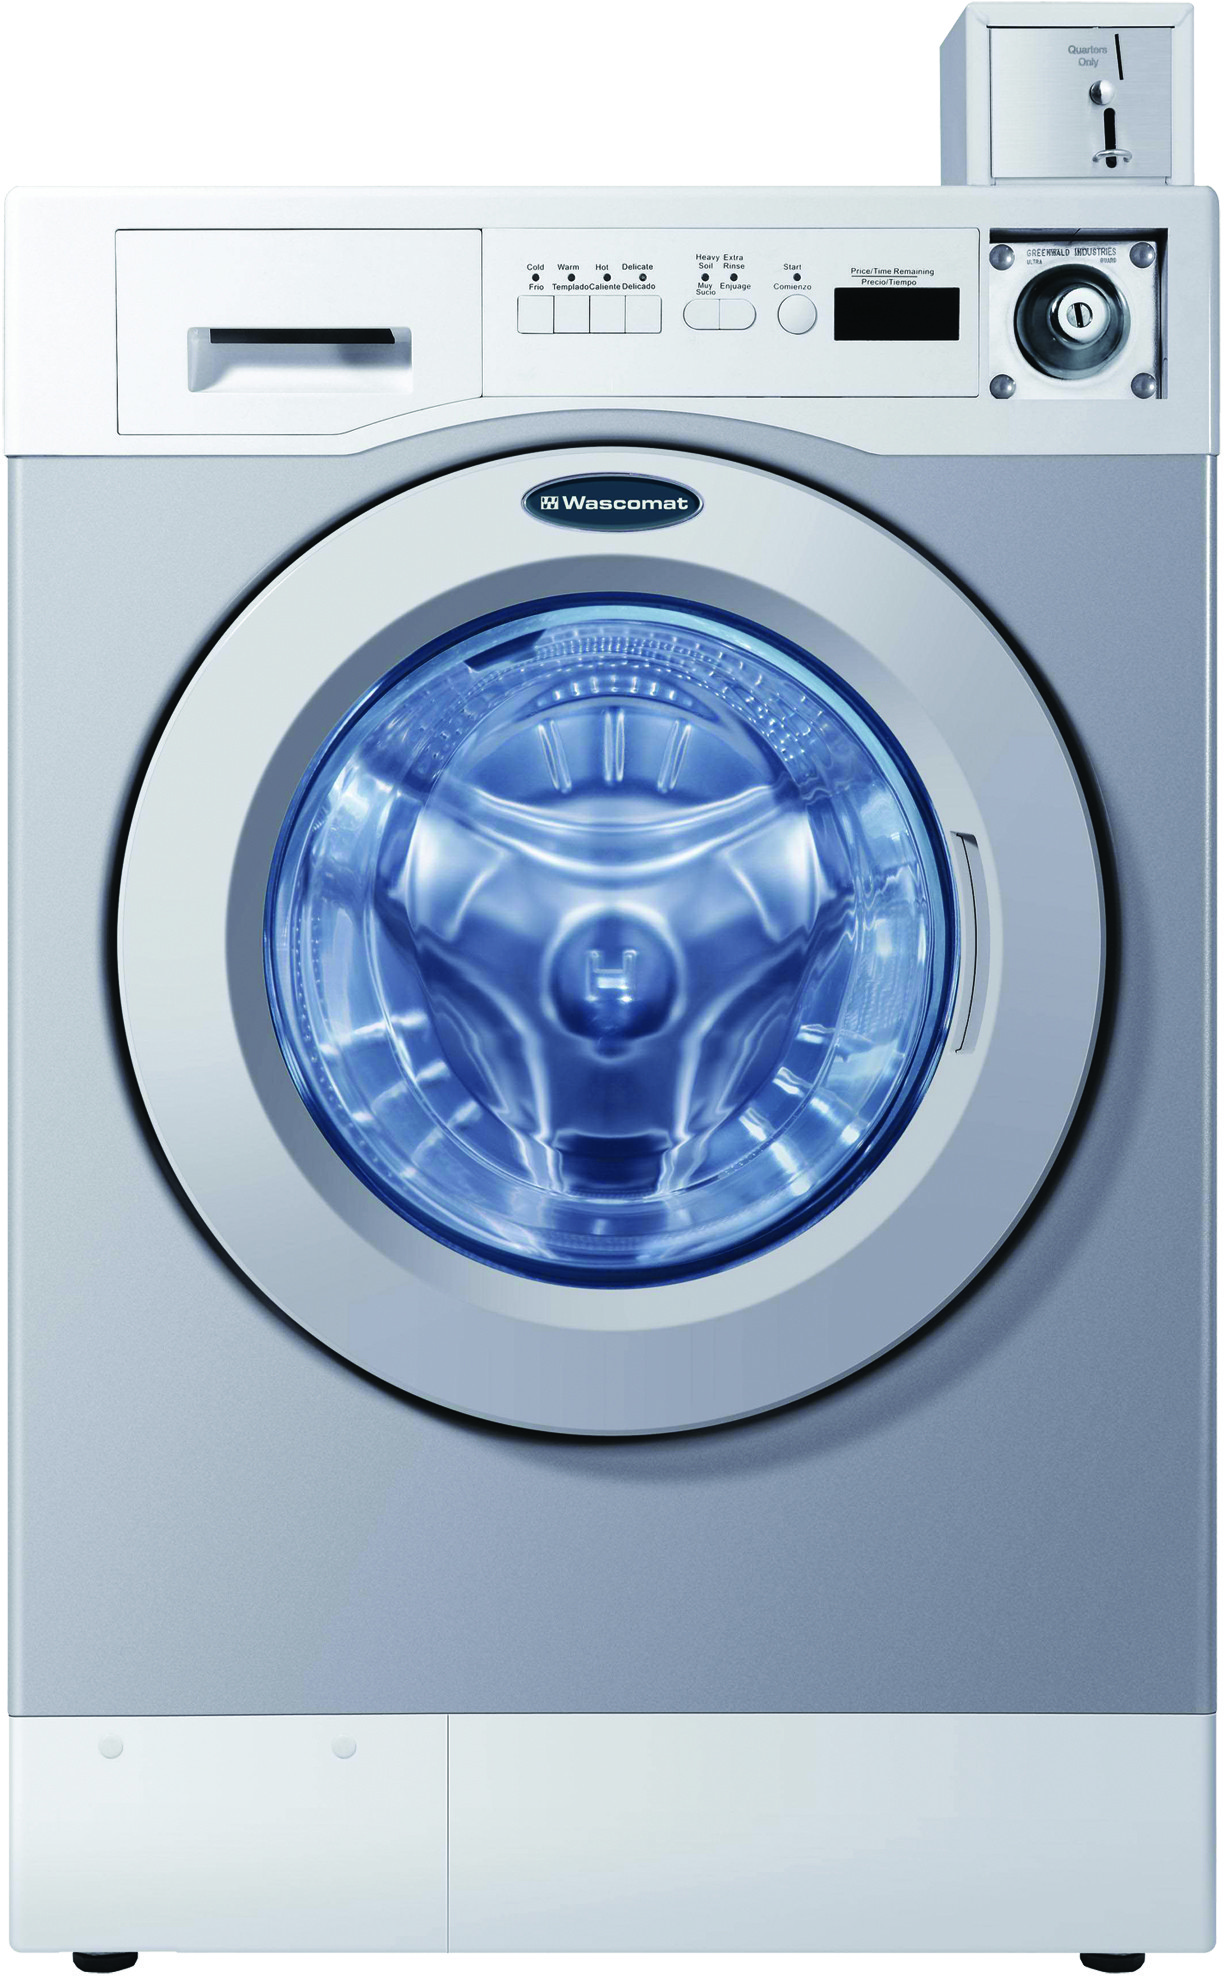 Crossover WHWF09810M 27 Inch Commercial Front-Load Washer with 3.5 cu. ft.  Capacity, 15,000 Cycle Life, 1,000 RPM Spin Speed, 4 Wash Cycles, 300 G  Force, 8-Point Suspension, ADA Certified and Energy Star